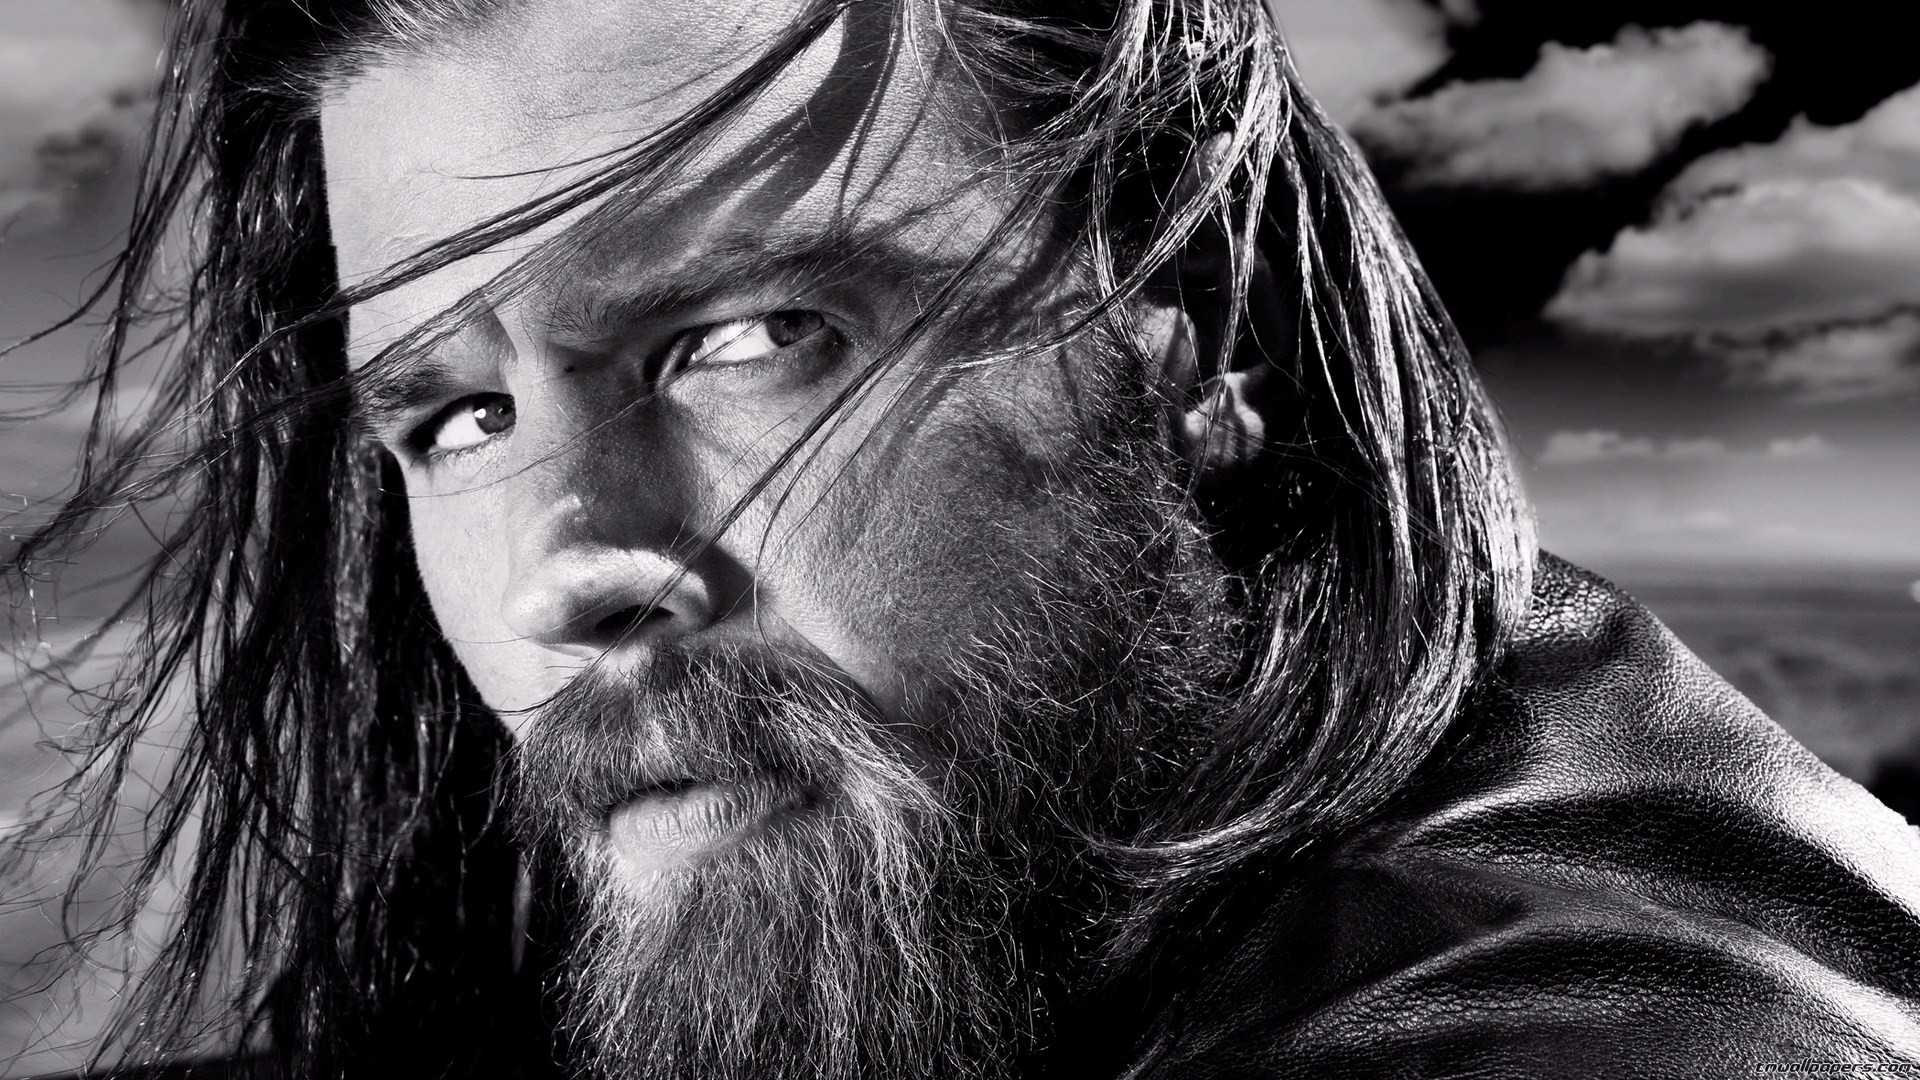 1920x1080 33 Amazing Sons of Anarchy Backgrounds | Qlty Ctrl - Because The Internet  Needs Discerning Curators